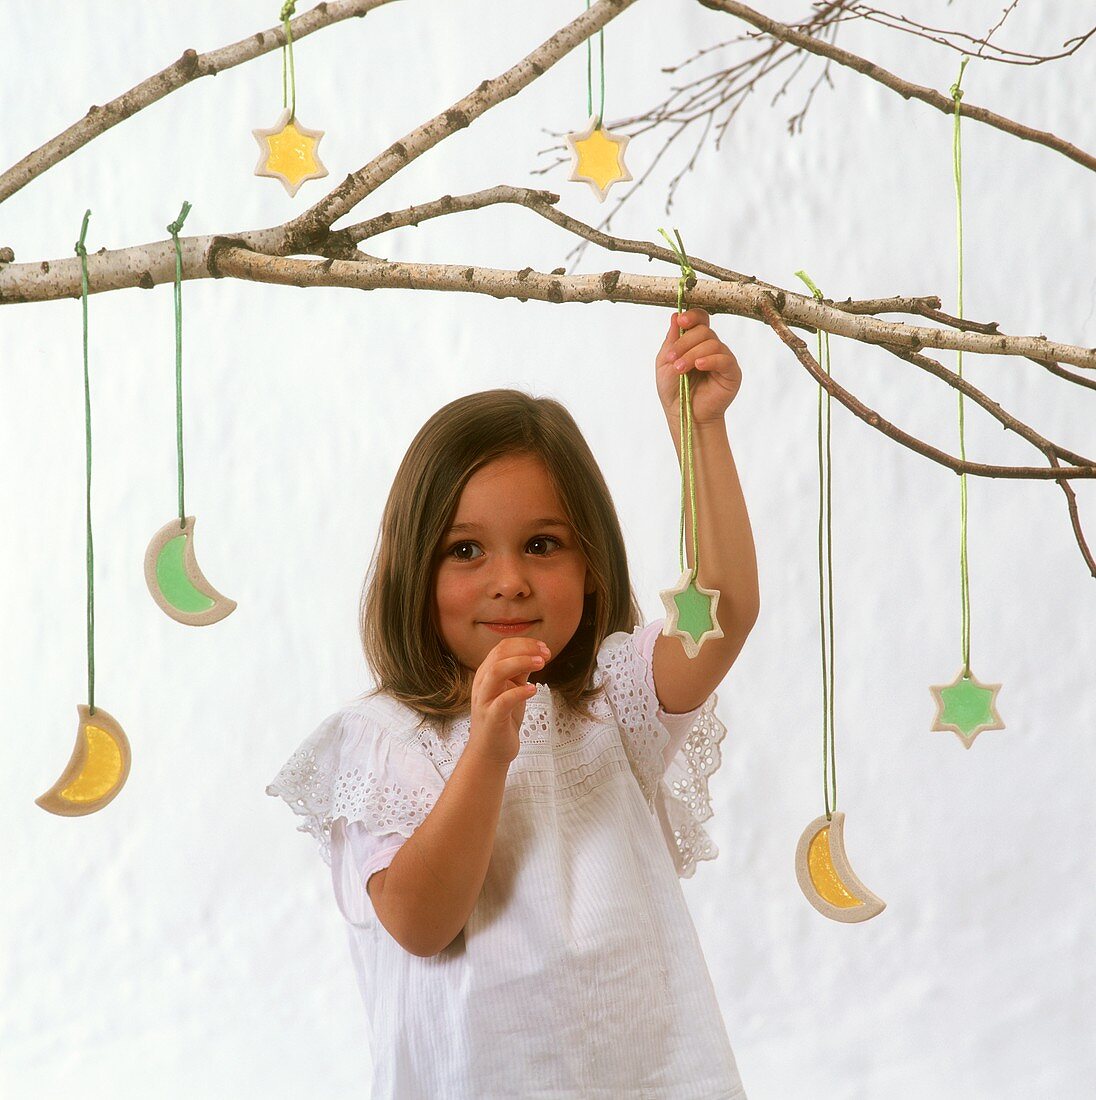 Small girl under birch branch with Christmas tree ornaments